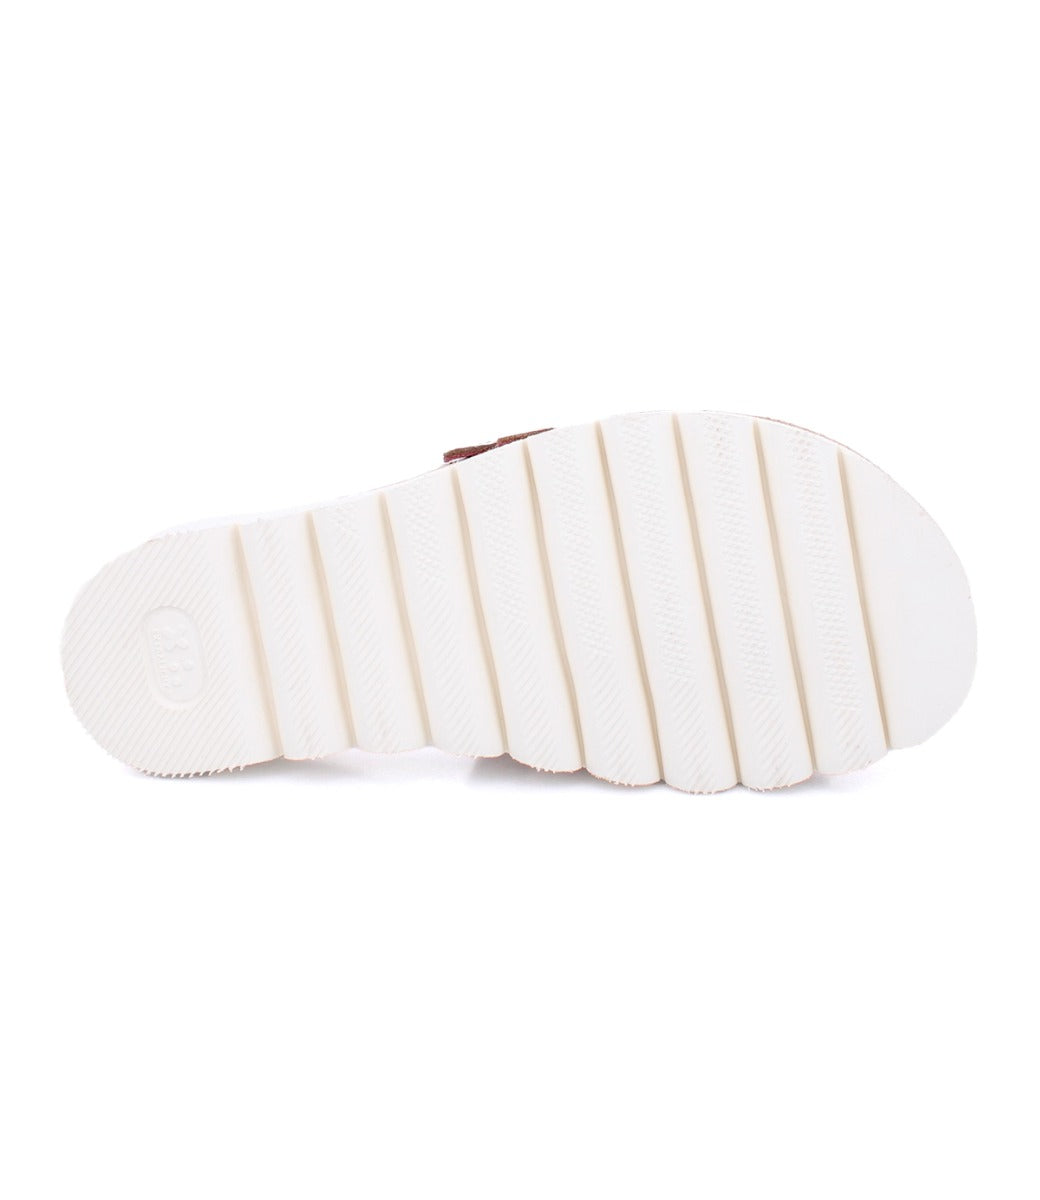 The sole of Bed Stu Holland women's sandals on a white background.